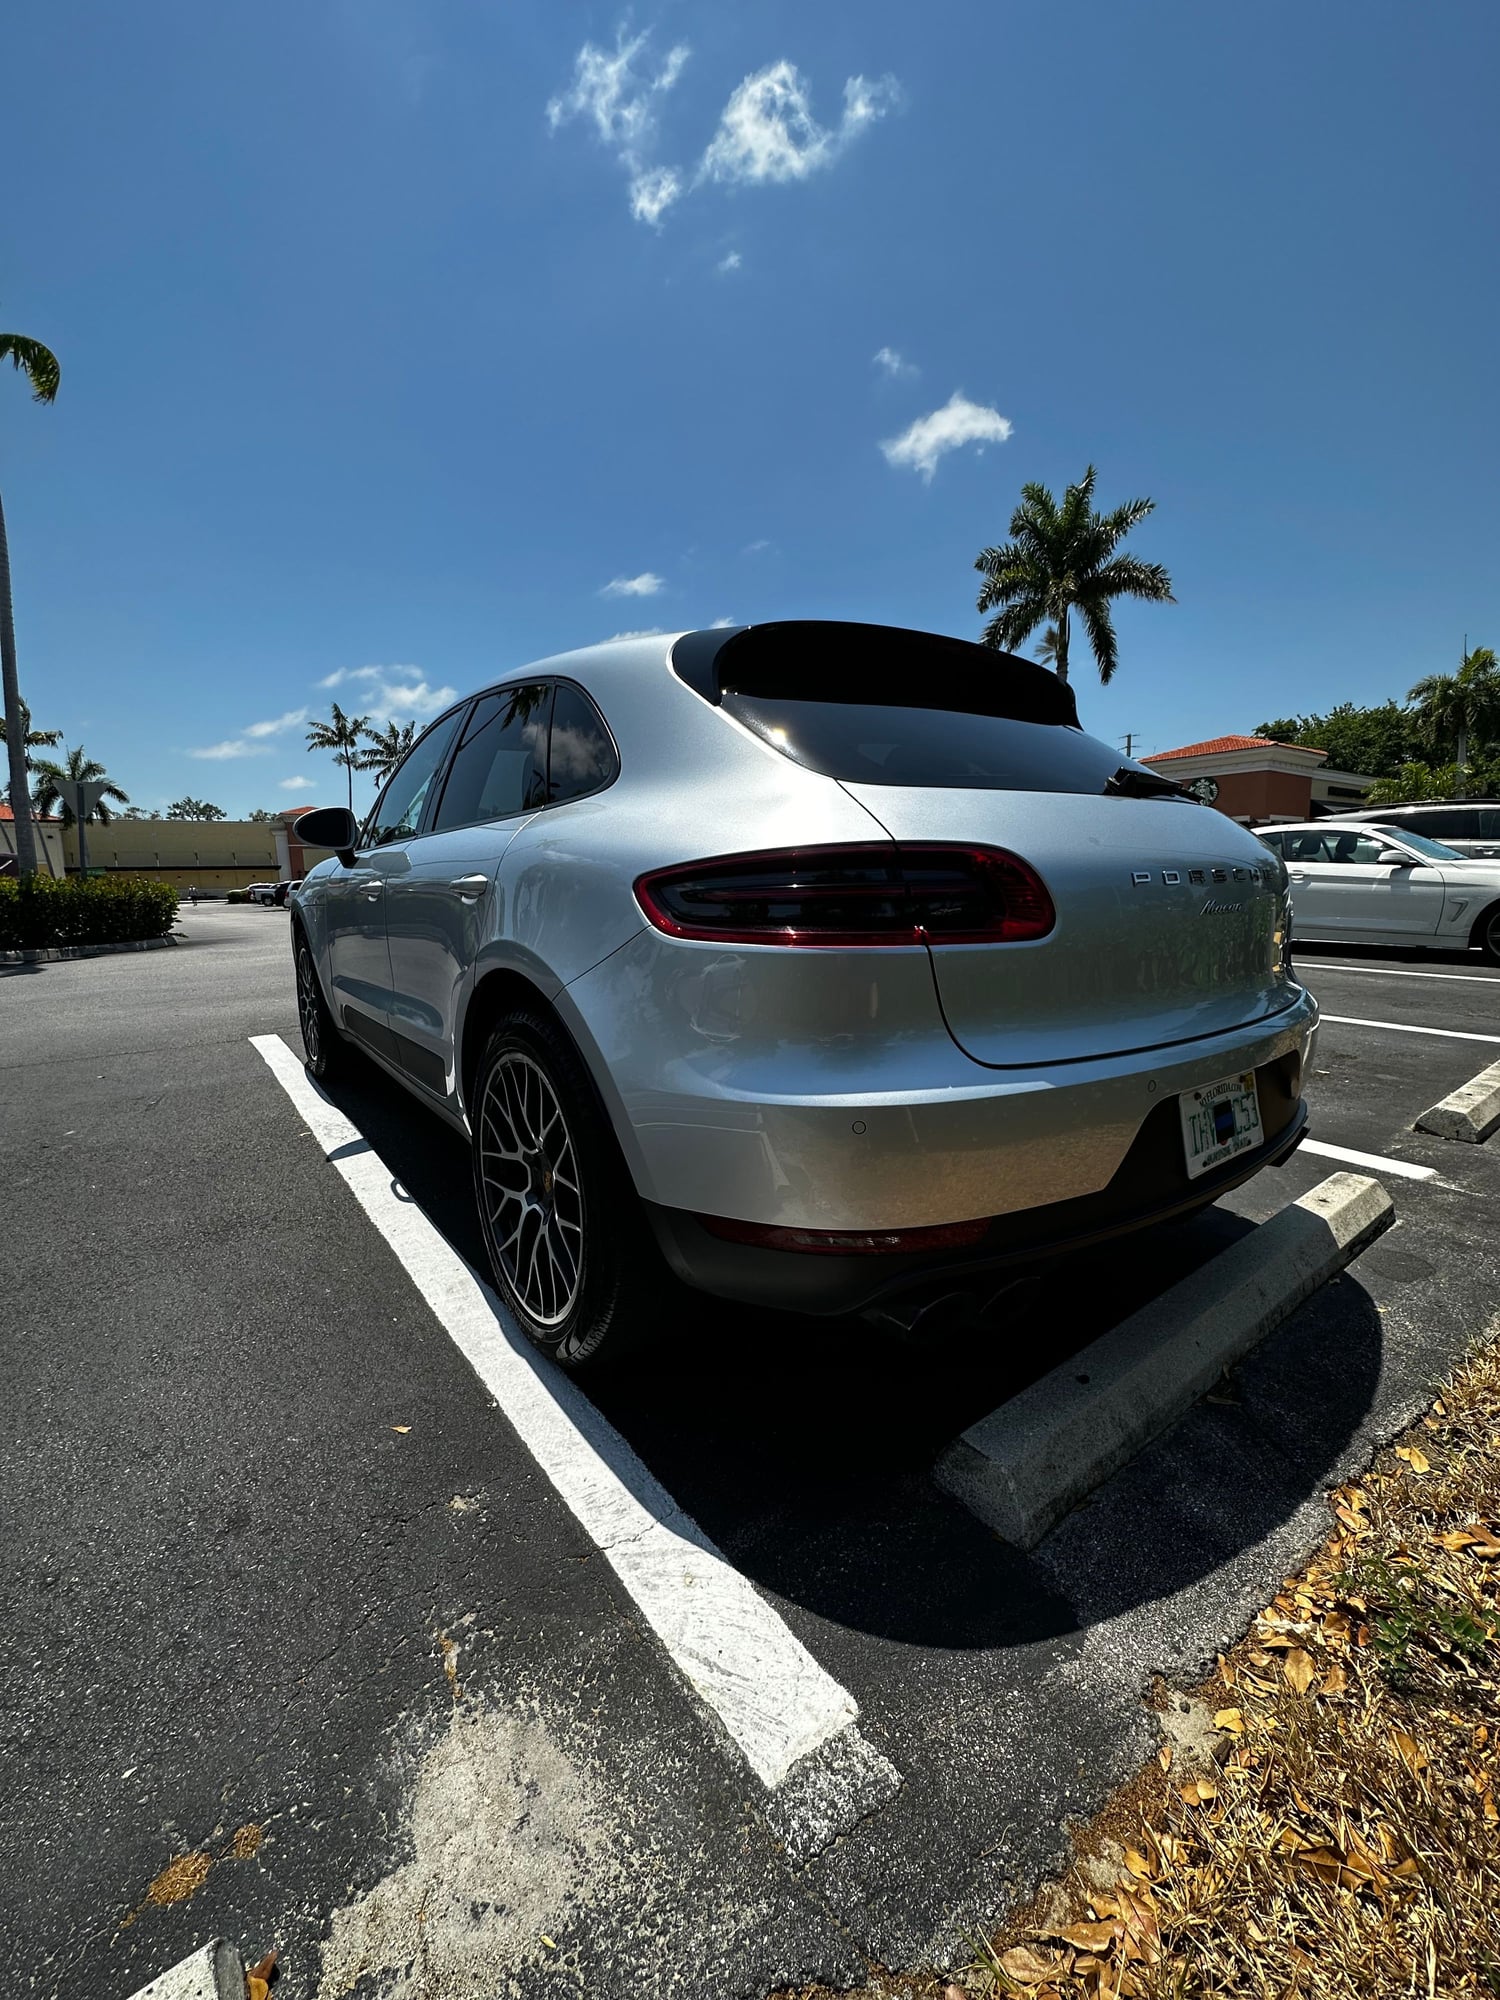 2018 Porsche Macan - 2018 Porsche Macan Sport Edition - Used - VIN WP1AA2A56JLB14171 - 59,103 Miles - 4 cyl - AWD - Automatic - SUV - Silver - Naples, FL 34119, United States